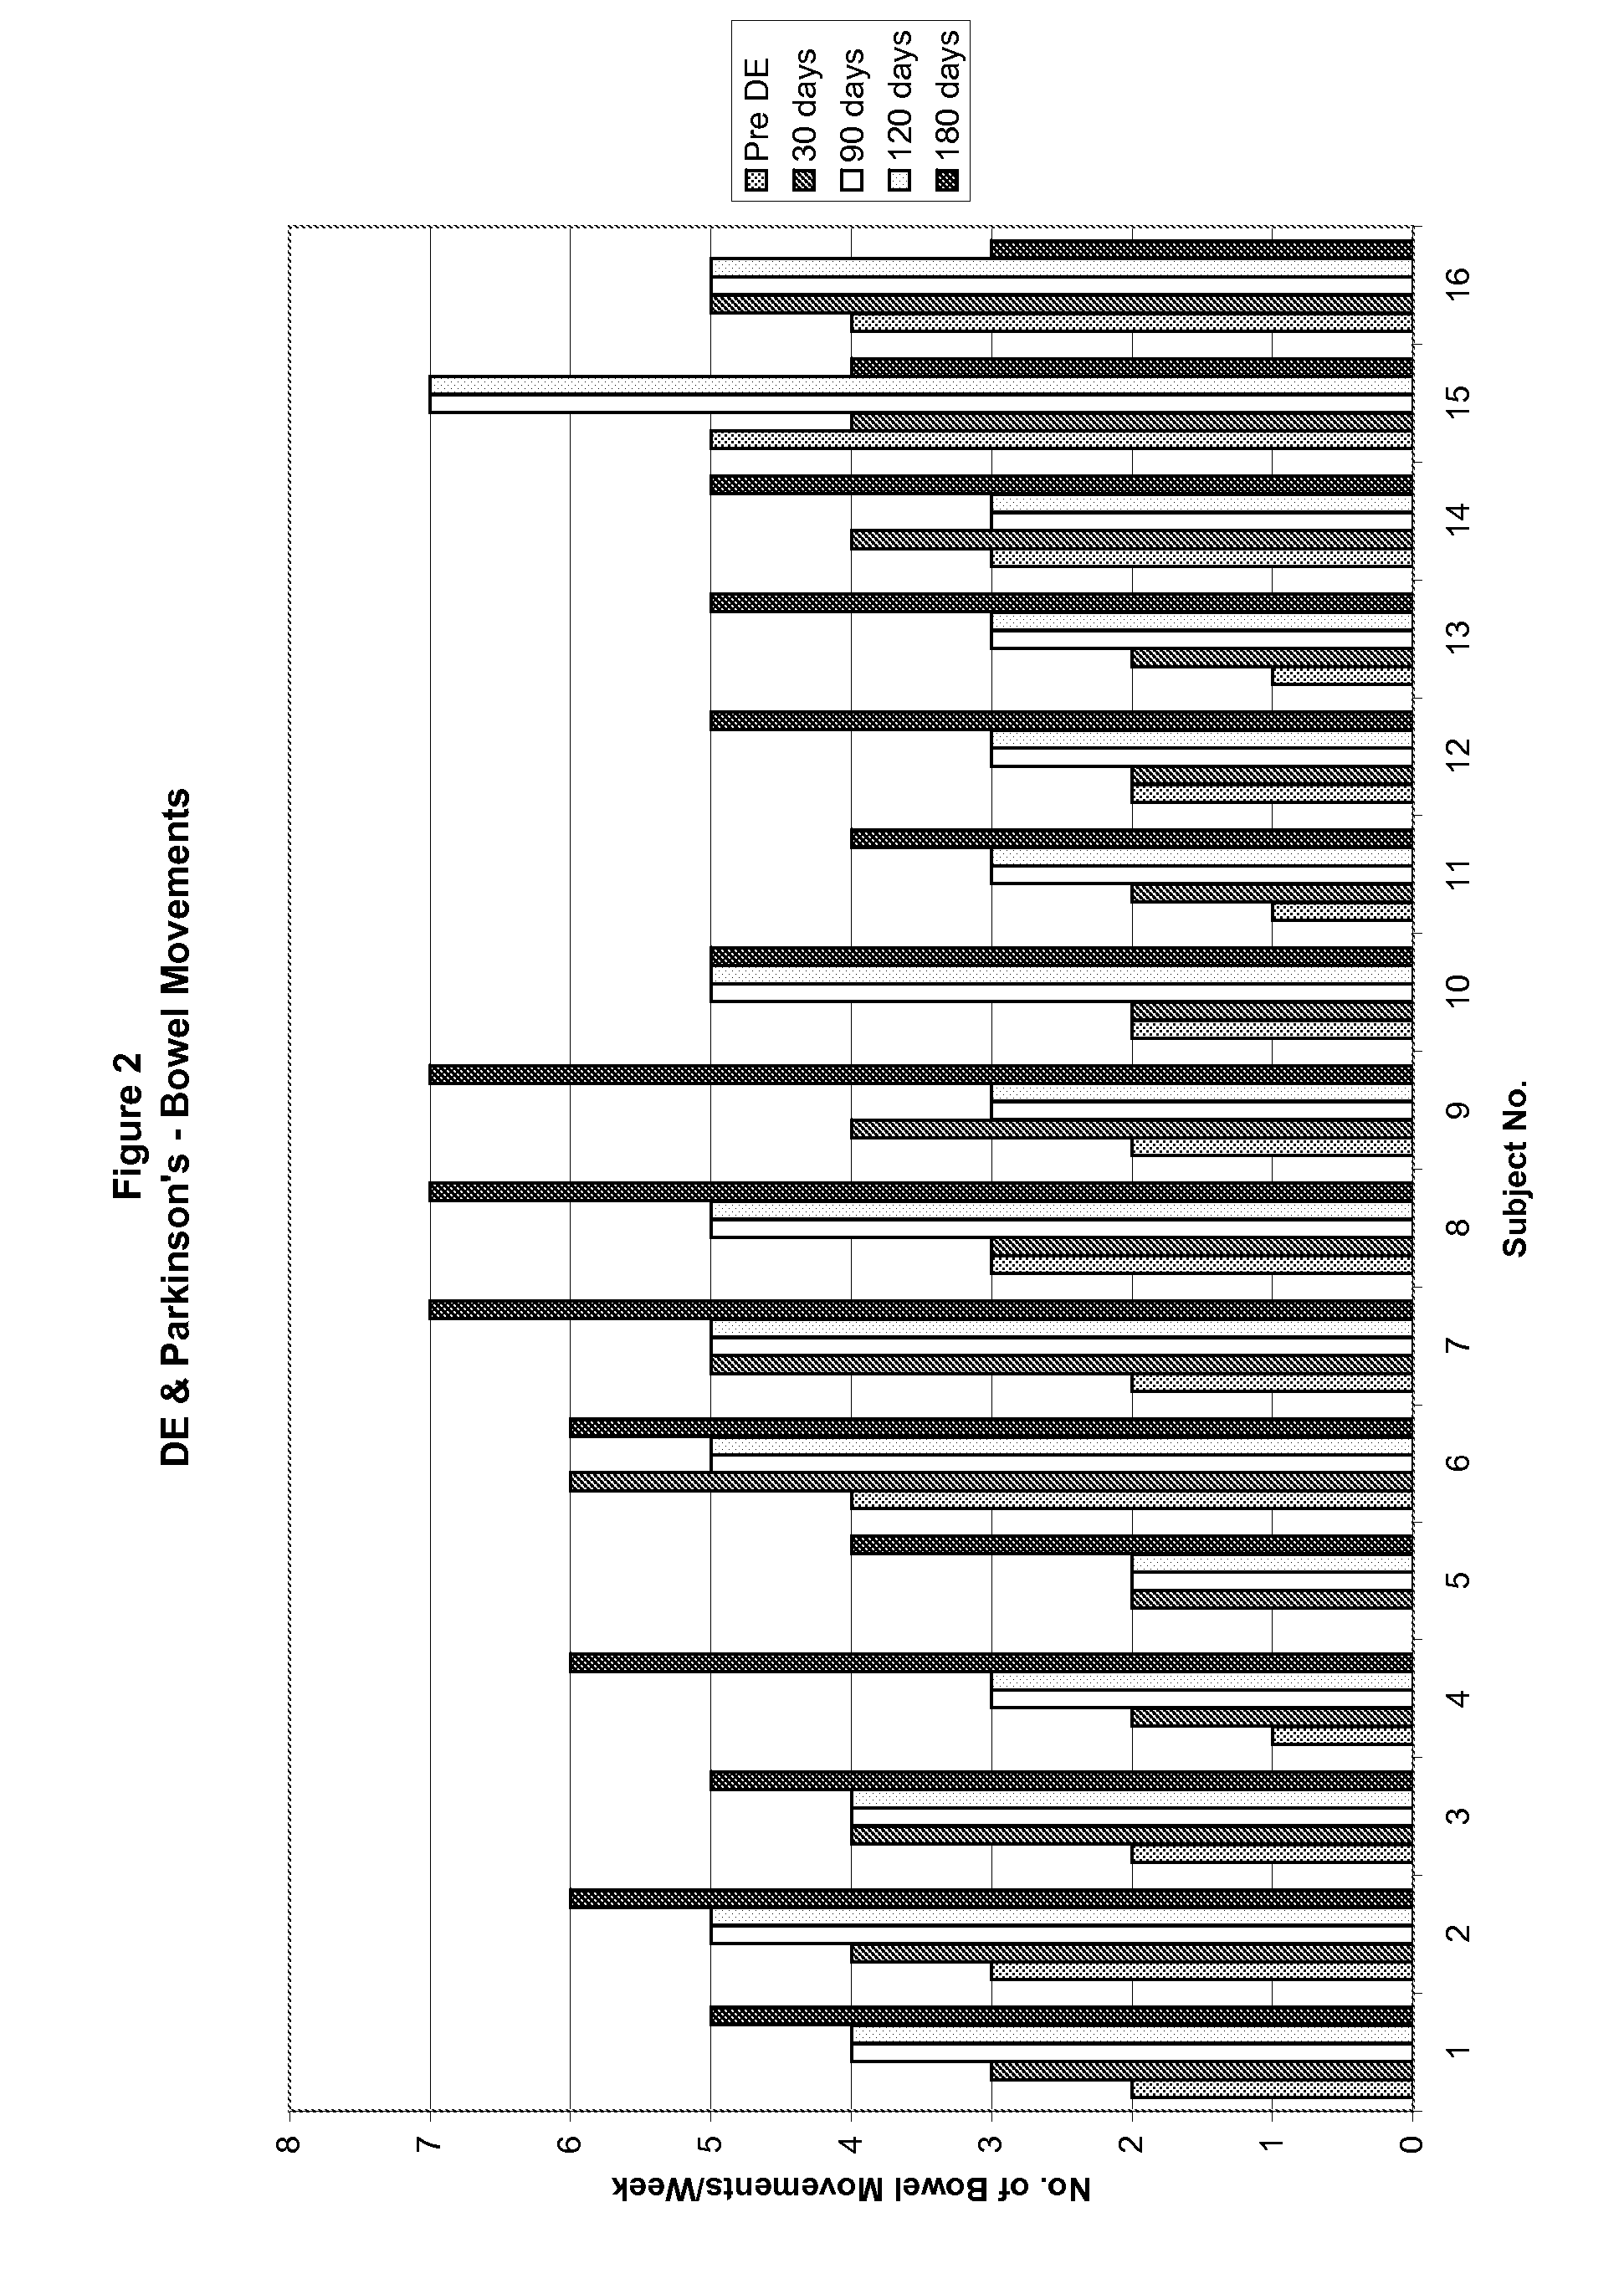 Method of treating and diagnosing parkinsons disease and related dysautonomic disorders